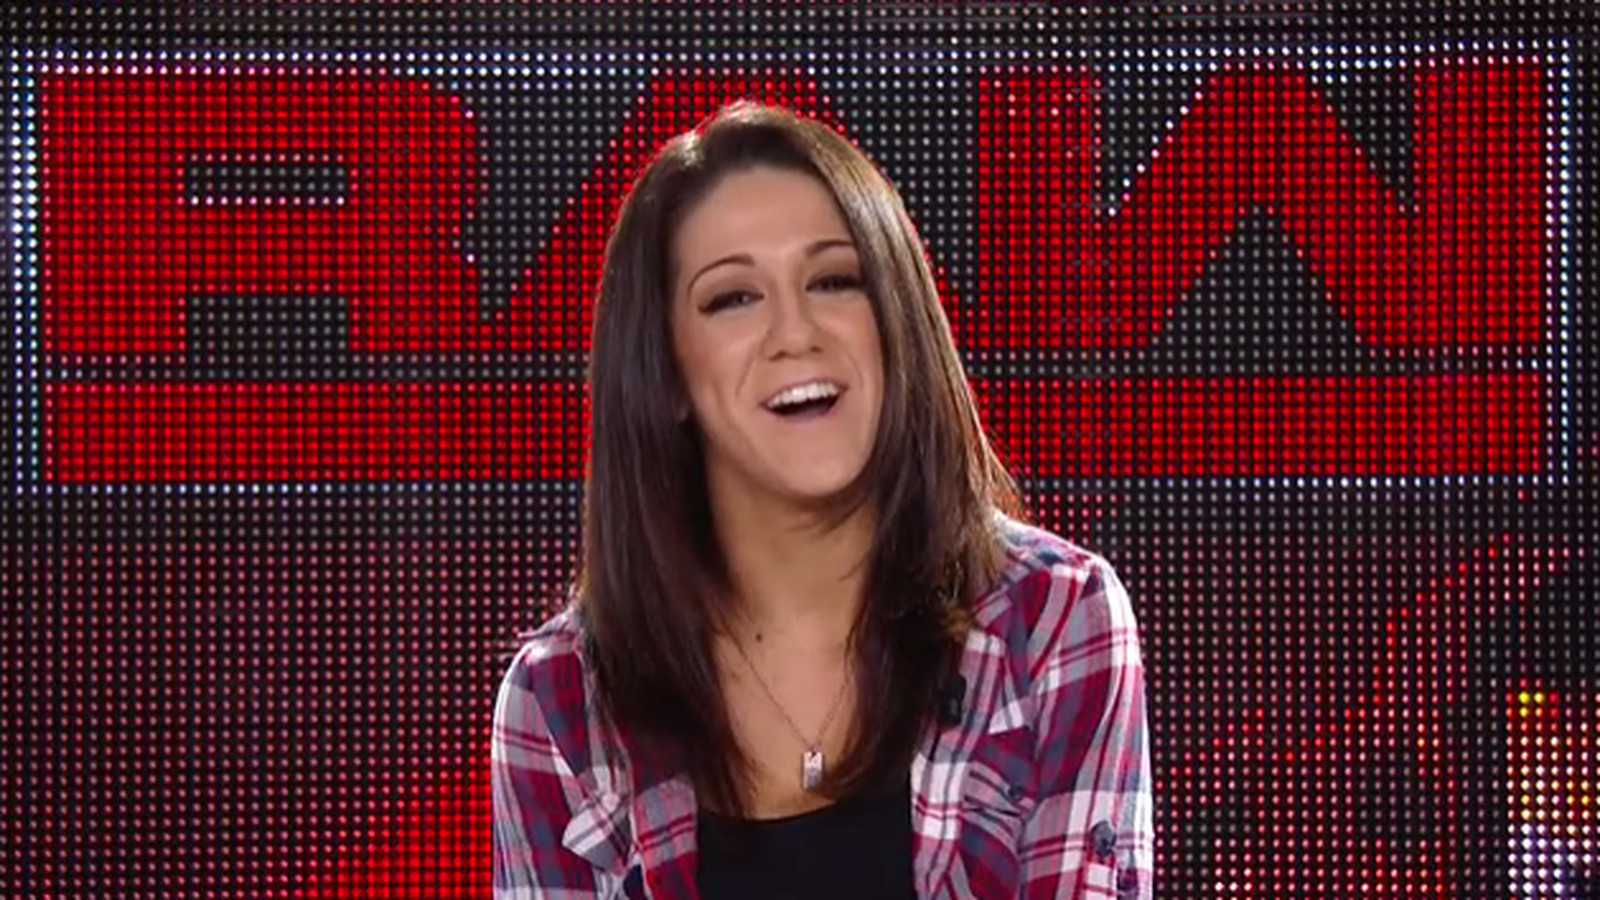 70+ Hot Pictures Of Bayley Will Hypnotise You With Her Exquisite Body 5